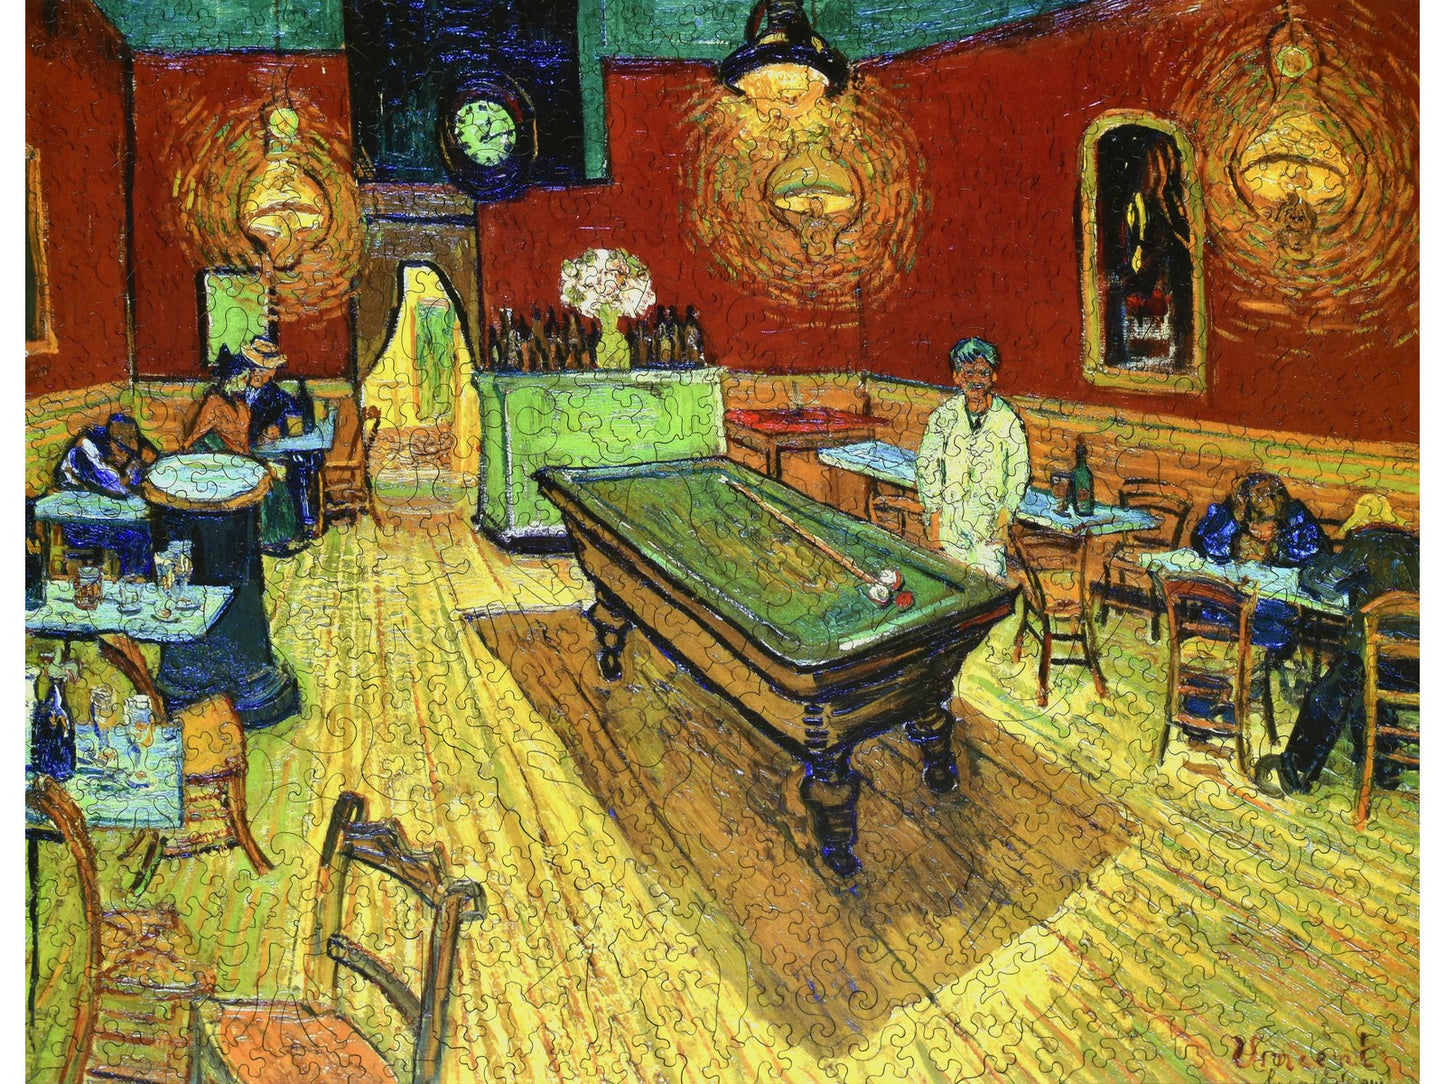 The front of the puzzle, Night Cafe, which shows the interior of a restaurant/bar with a pool table in the middle of the room.